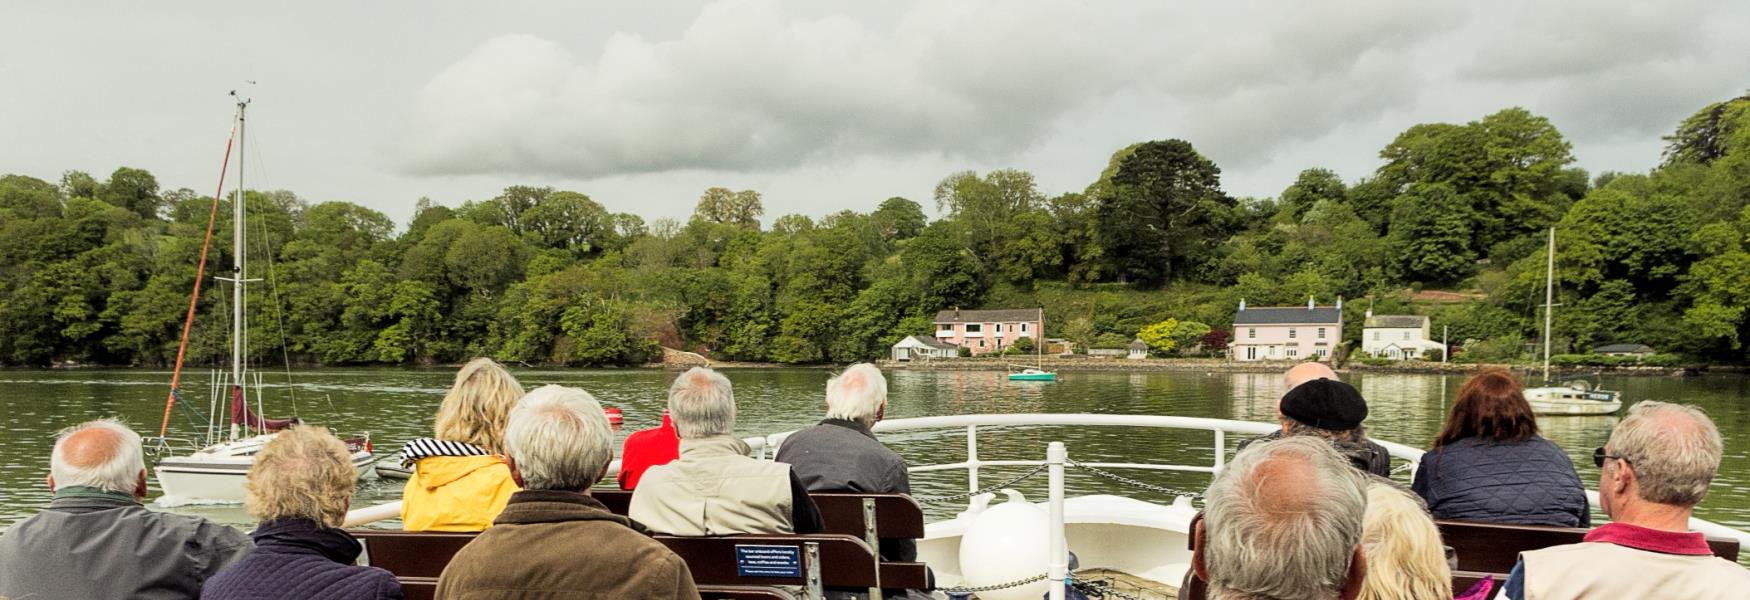 Boat tour on the River Dart